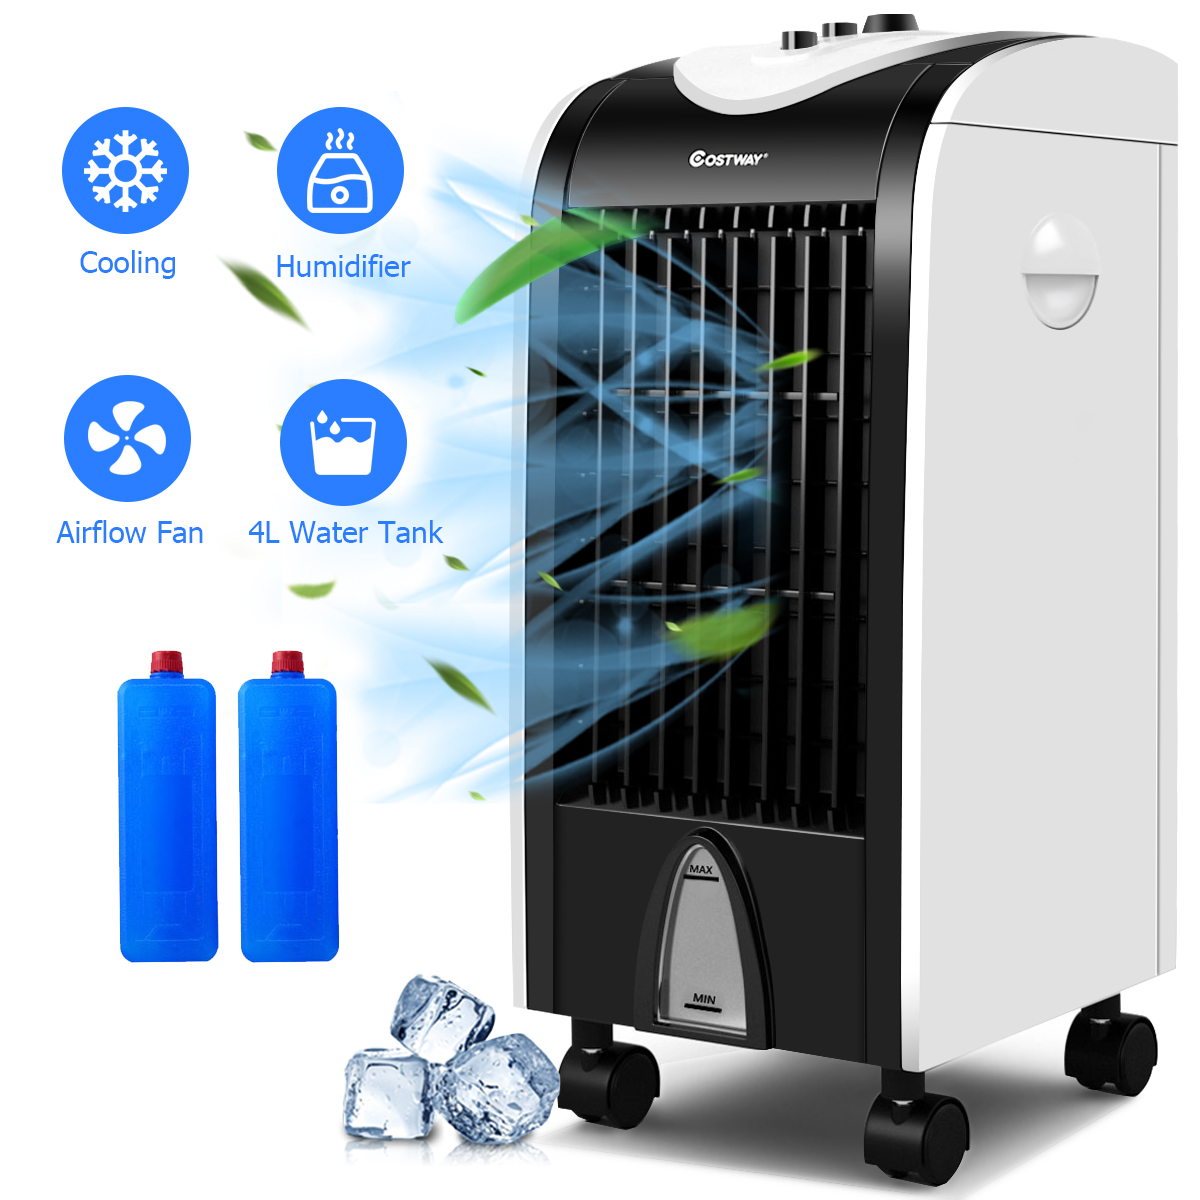 PS//ABS Plastic, 2 Ice Cartridges, Remote Control 5m Uniprodo Mobile Water Air Cooler 4-in-1 Evaporative Air Cooler Humidifier Purifier Heater Portable Air Filter Flexible 6L Water Tank UNI/_COOLER/_01